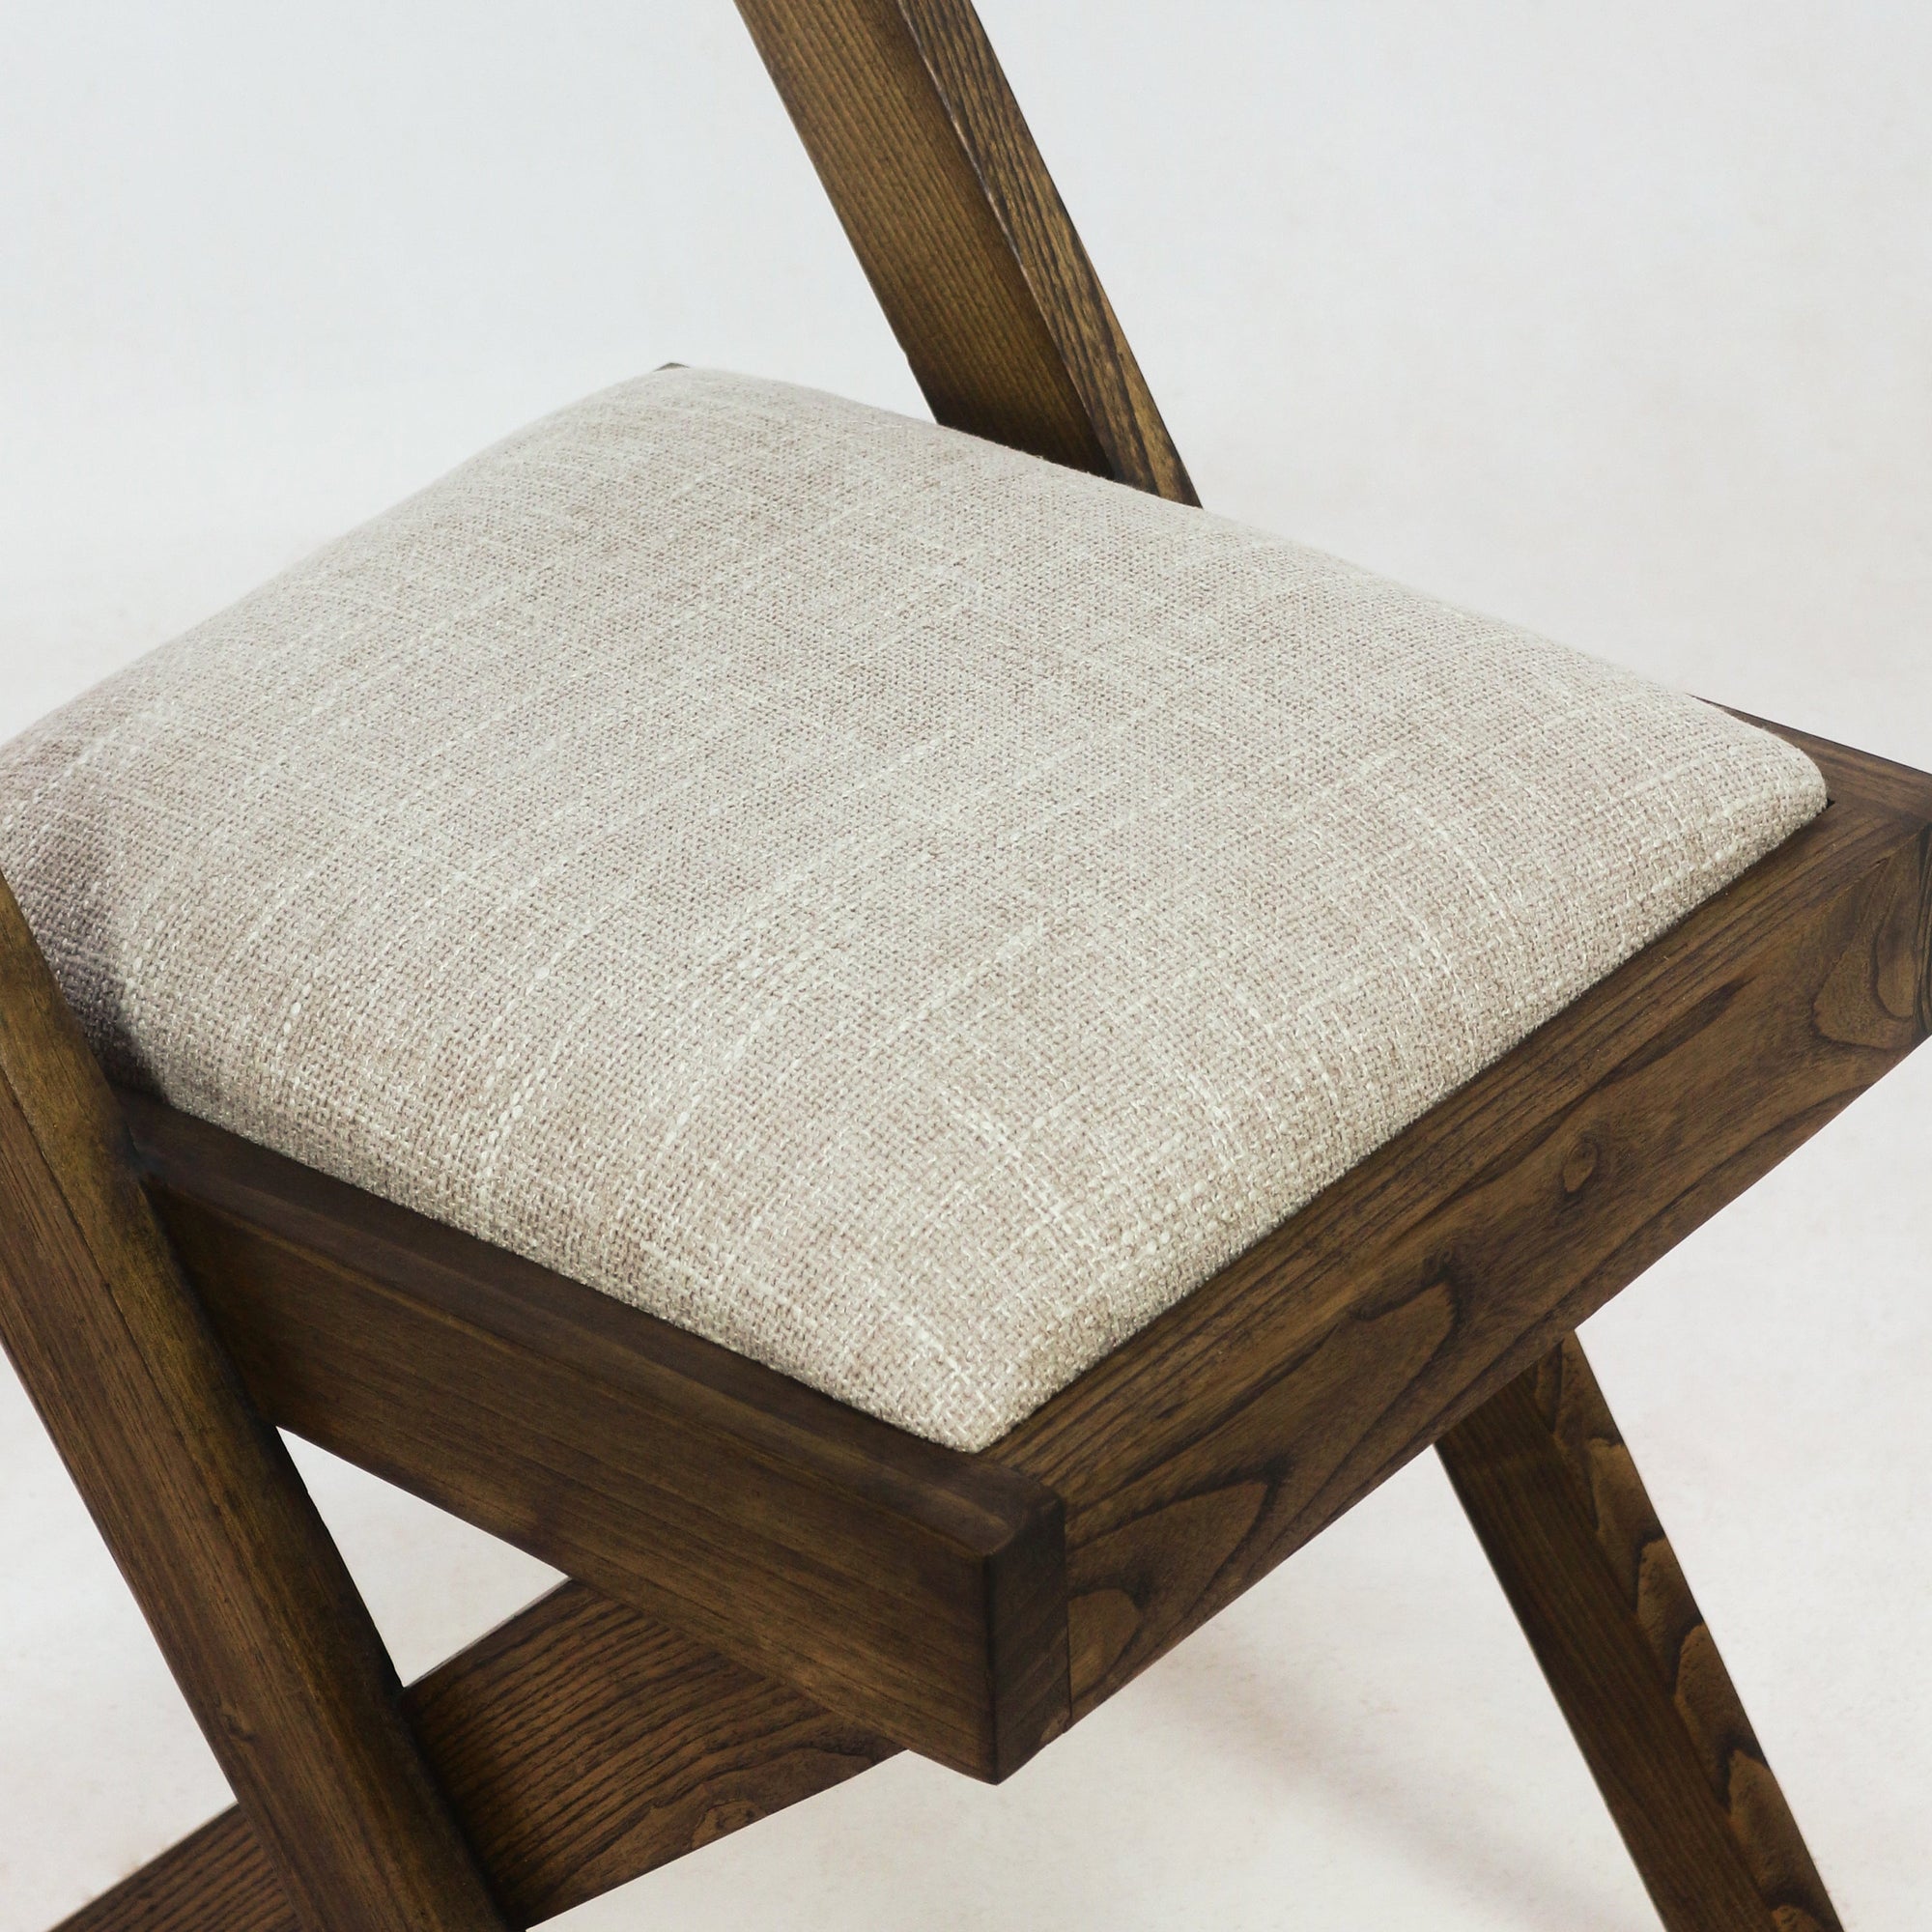 Solid Oak Jeanneret Inspired Side Chair with Cushion - INTERIORTONIC